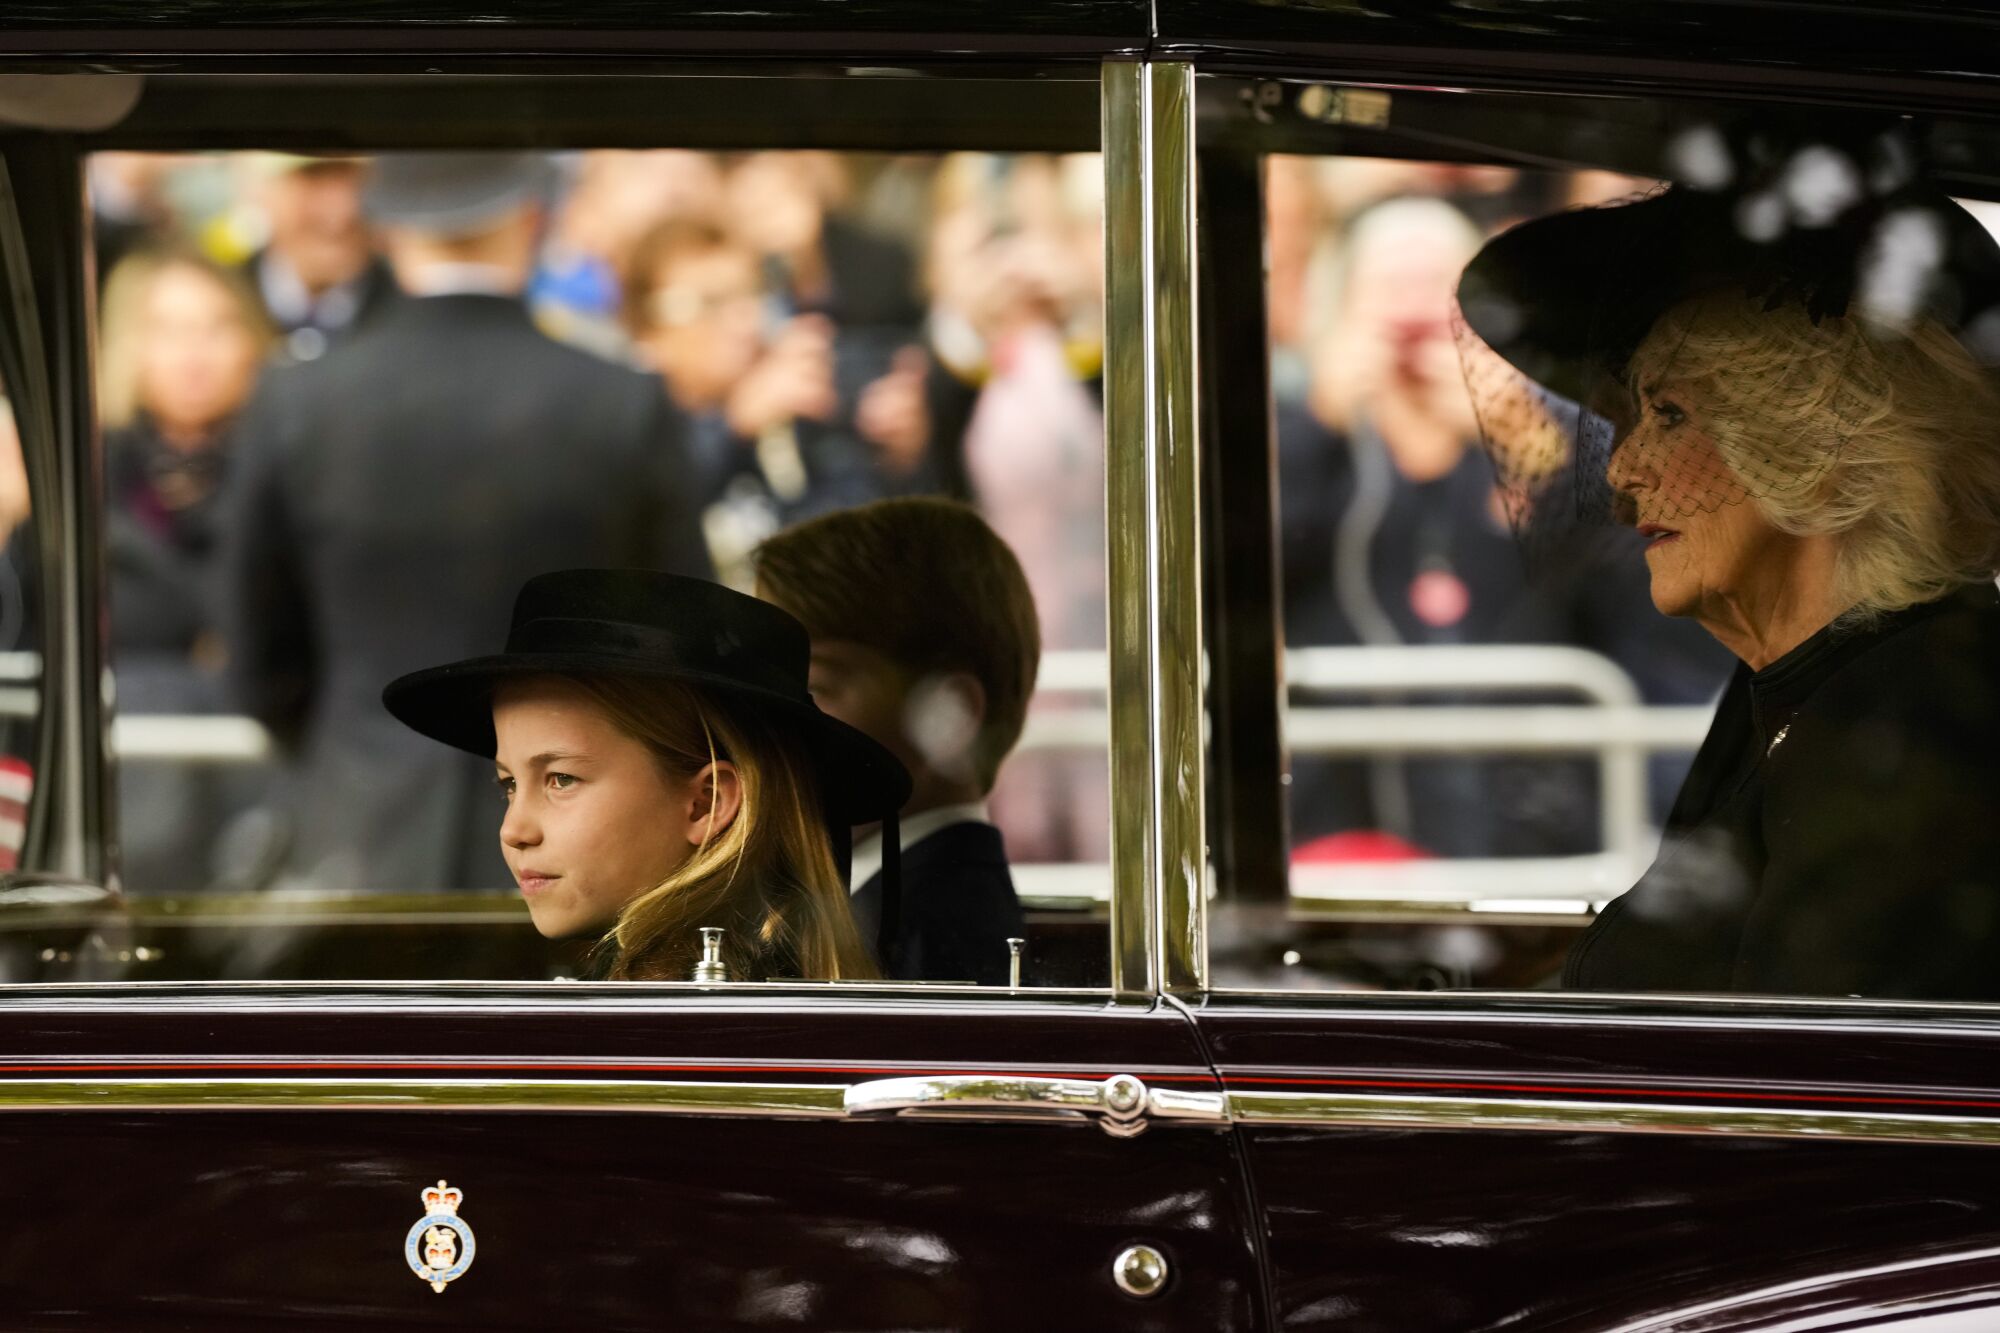  Princess Charlotte and Prince George ride in a car with the queen consort, Camilla.